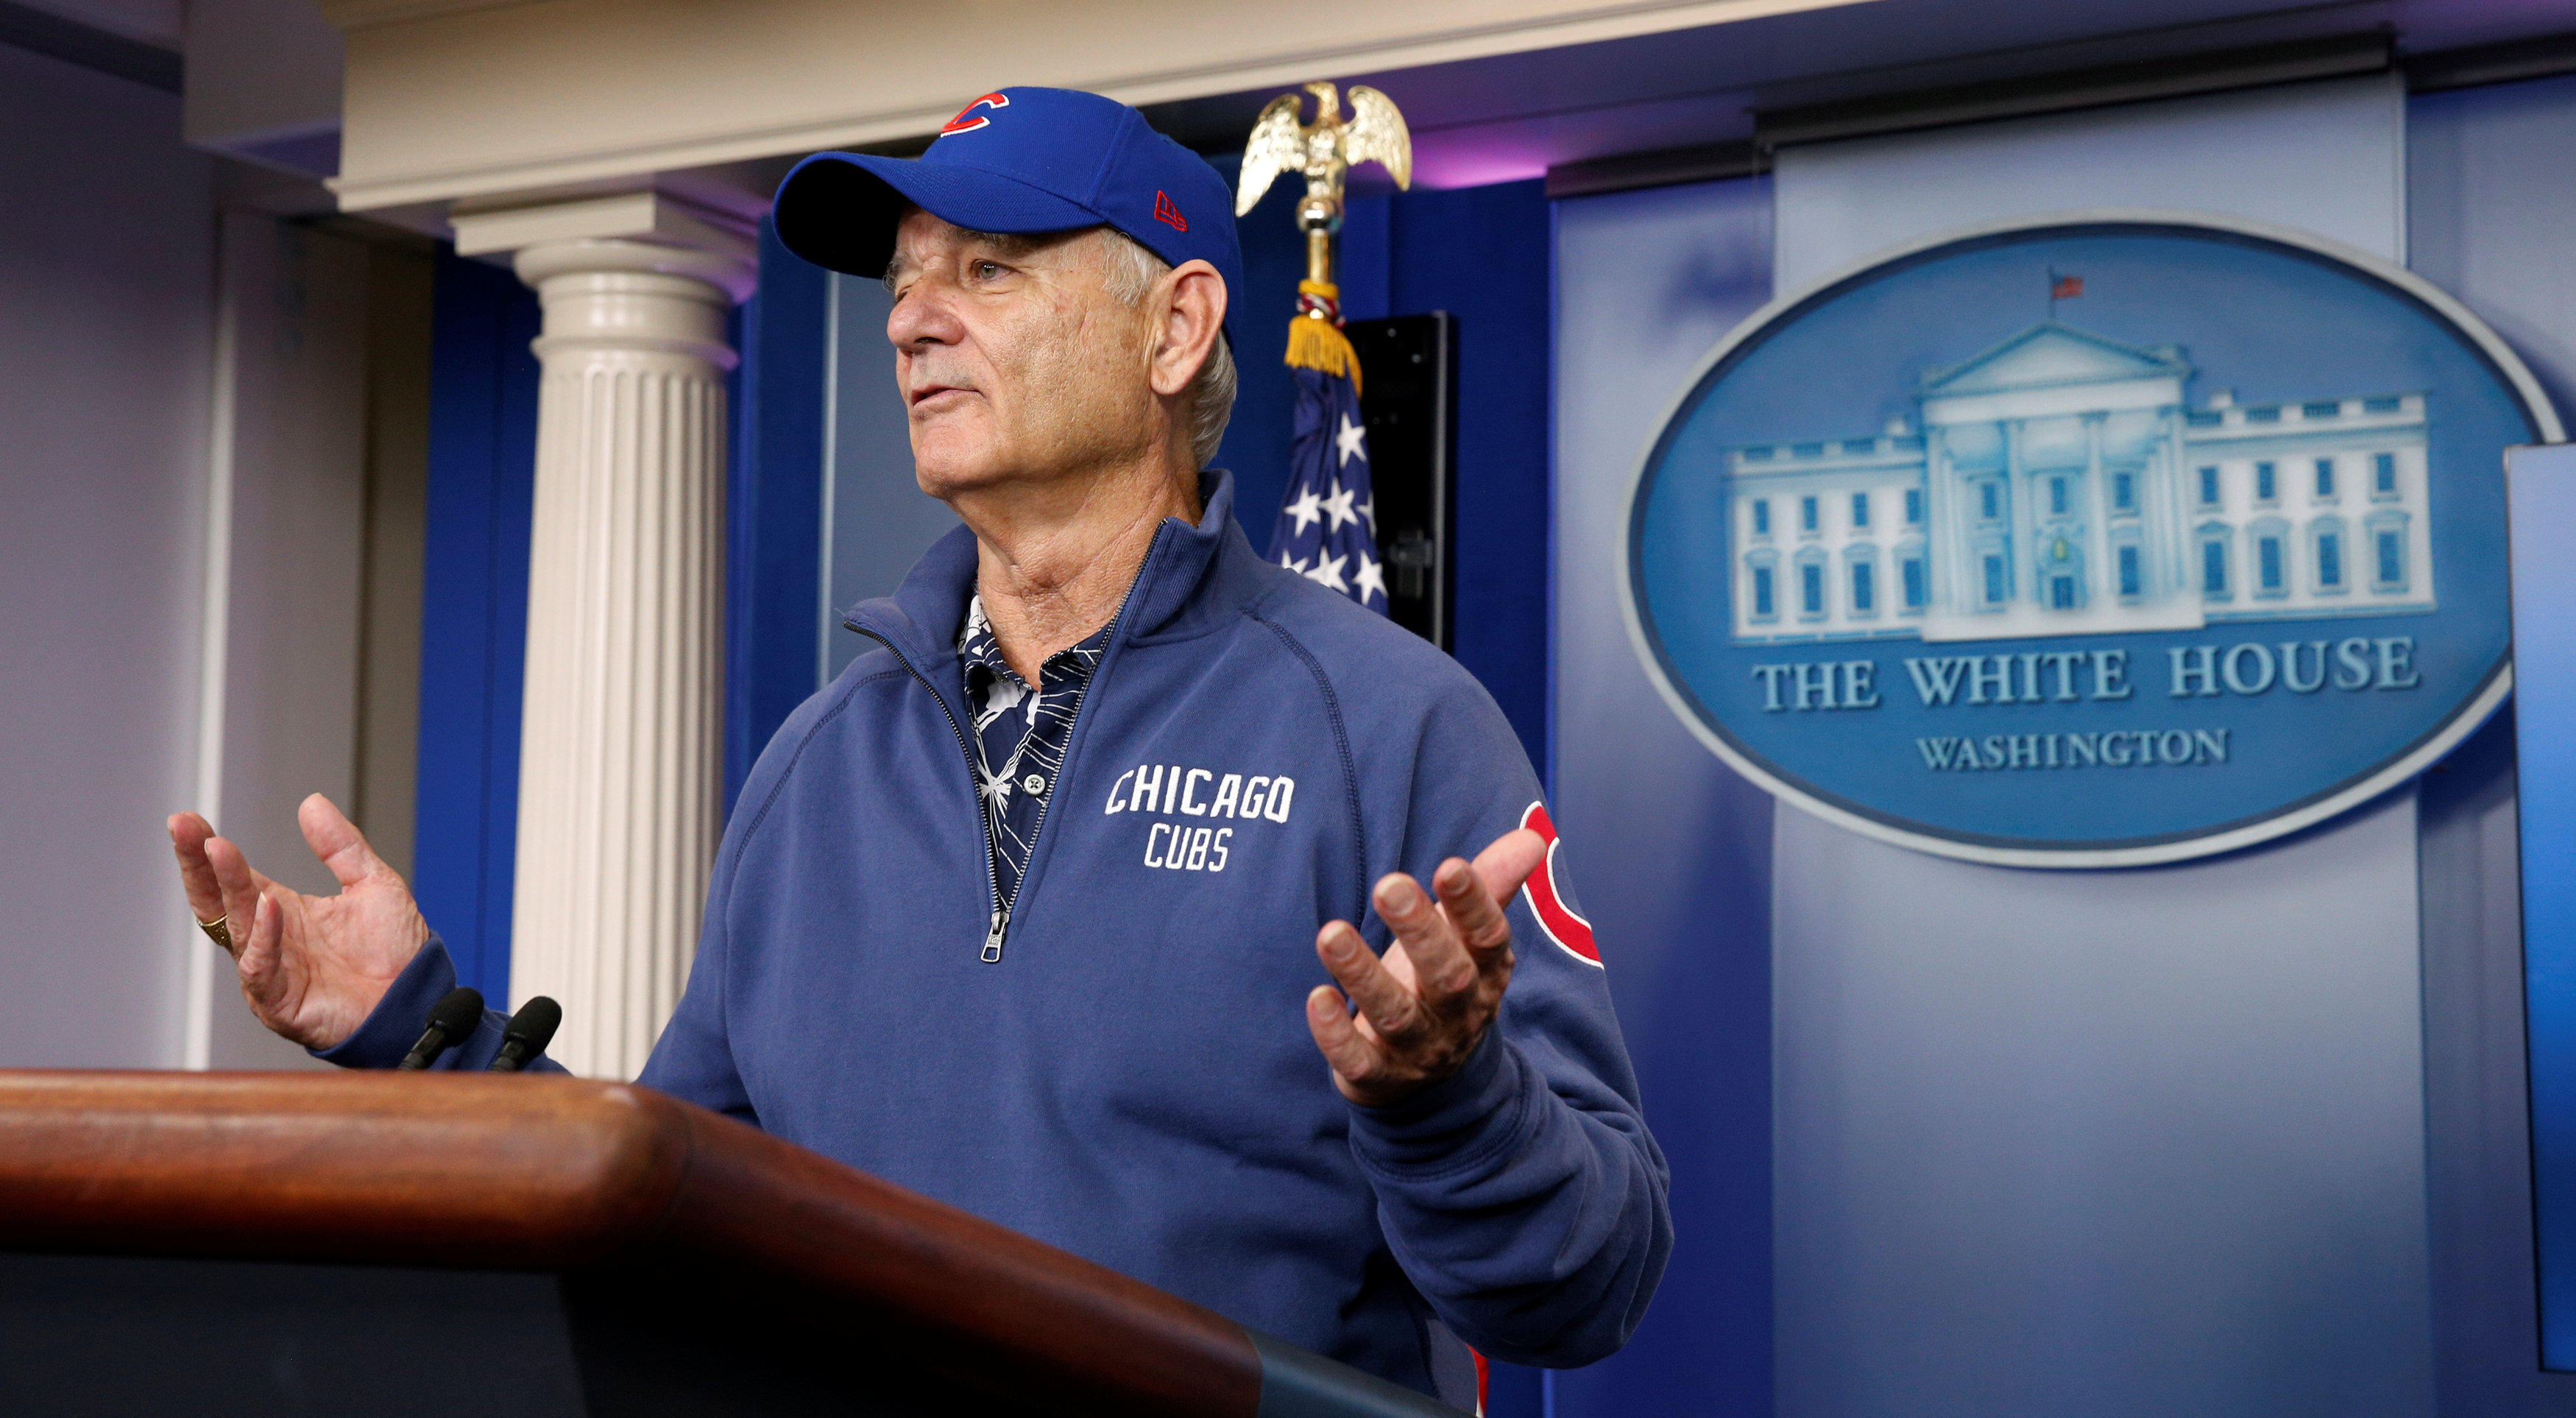 Bill Murray makes surprise appearance at White House - CBS News